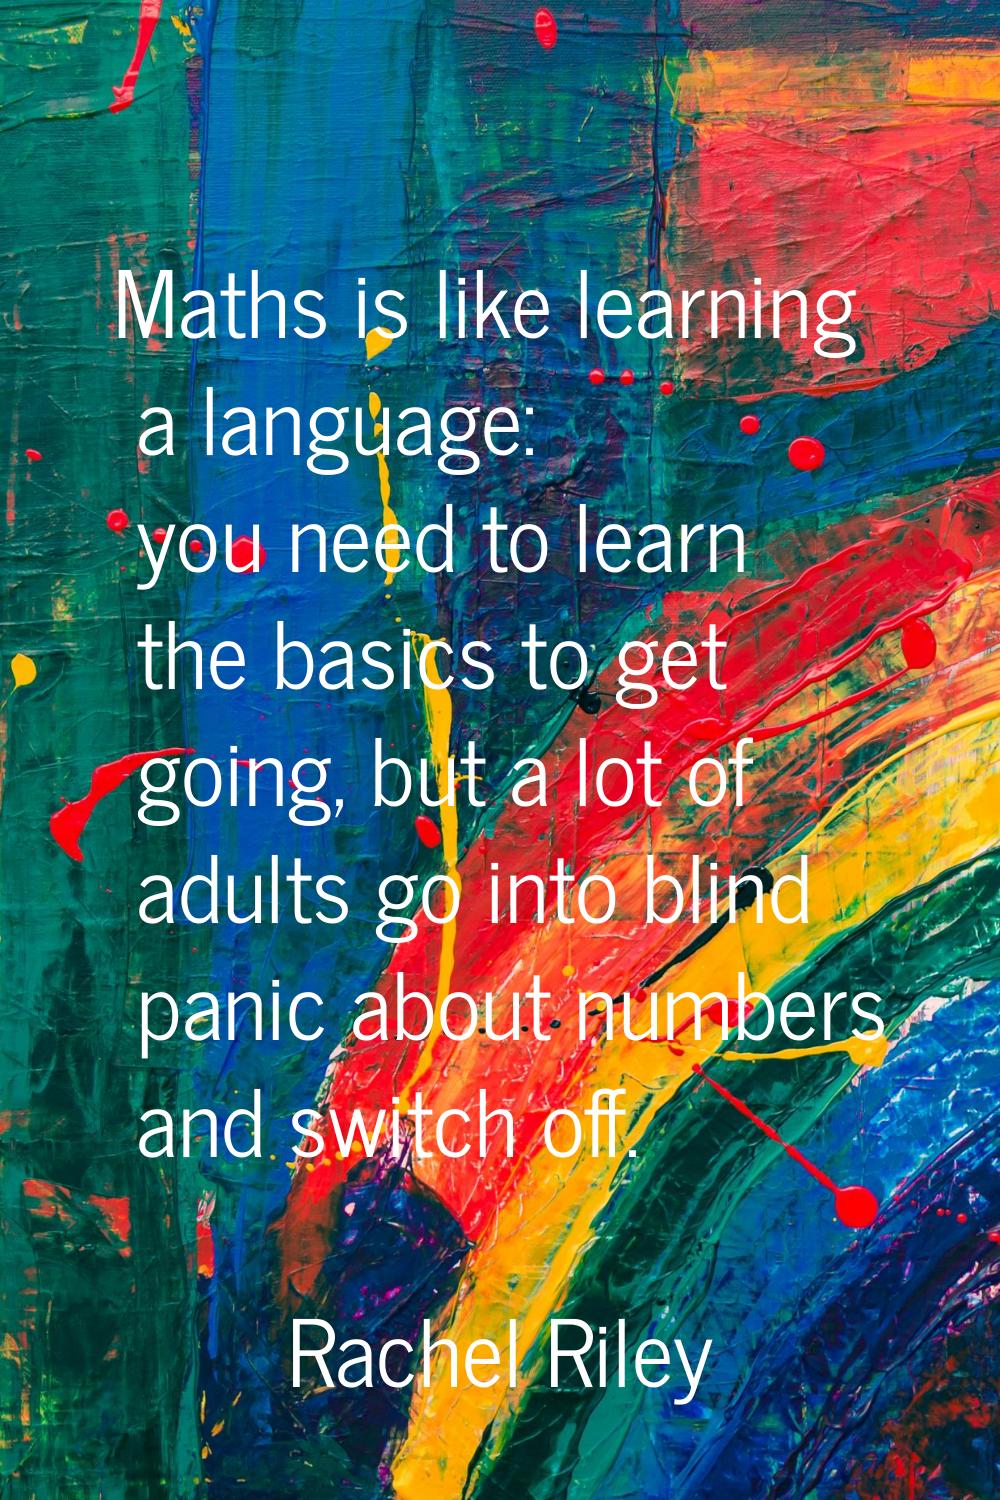 Maths is like learning a language: you need to learn the basics to get going, but a lot of adults g